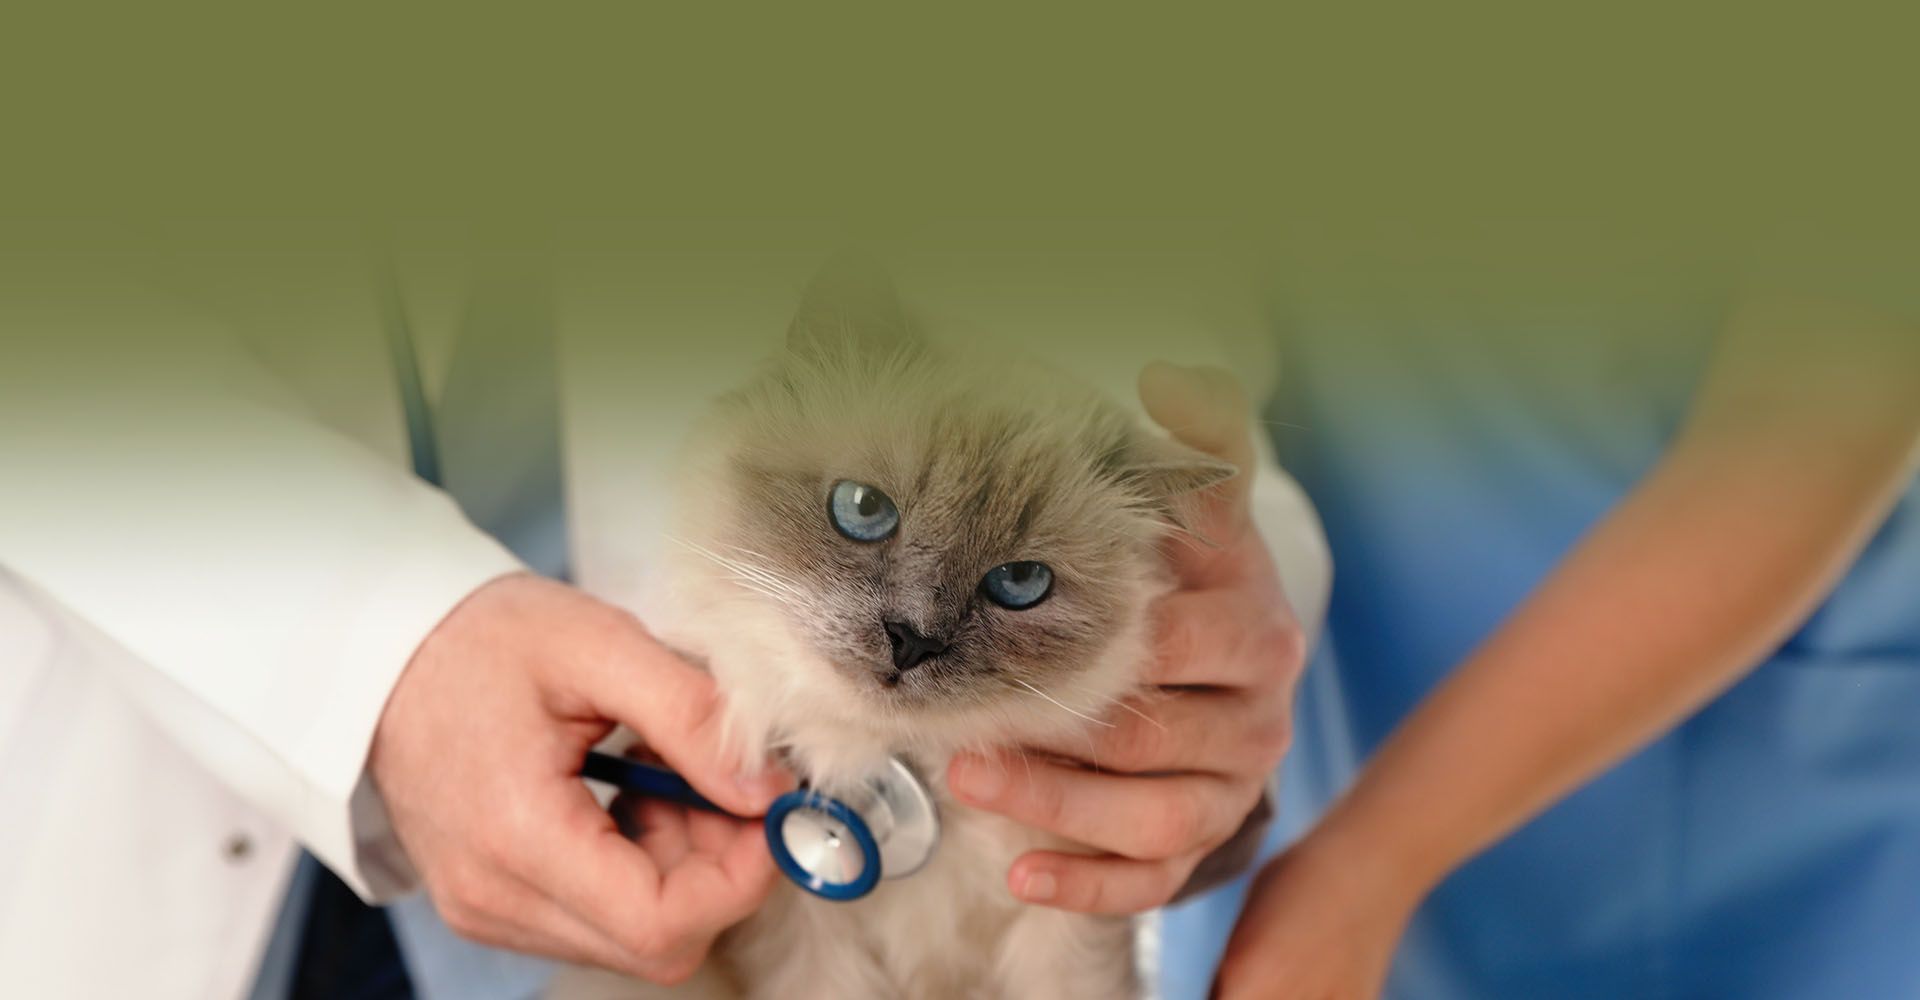 professional veterinary examining a cat in clinic